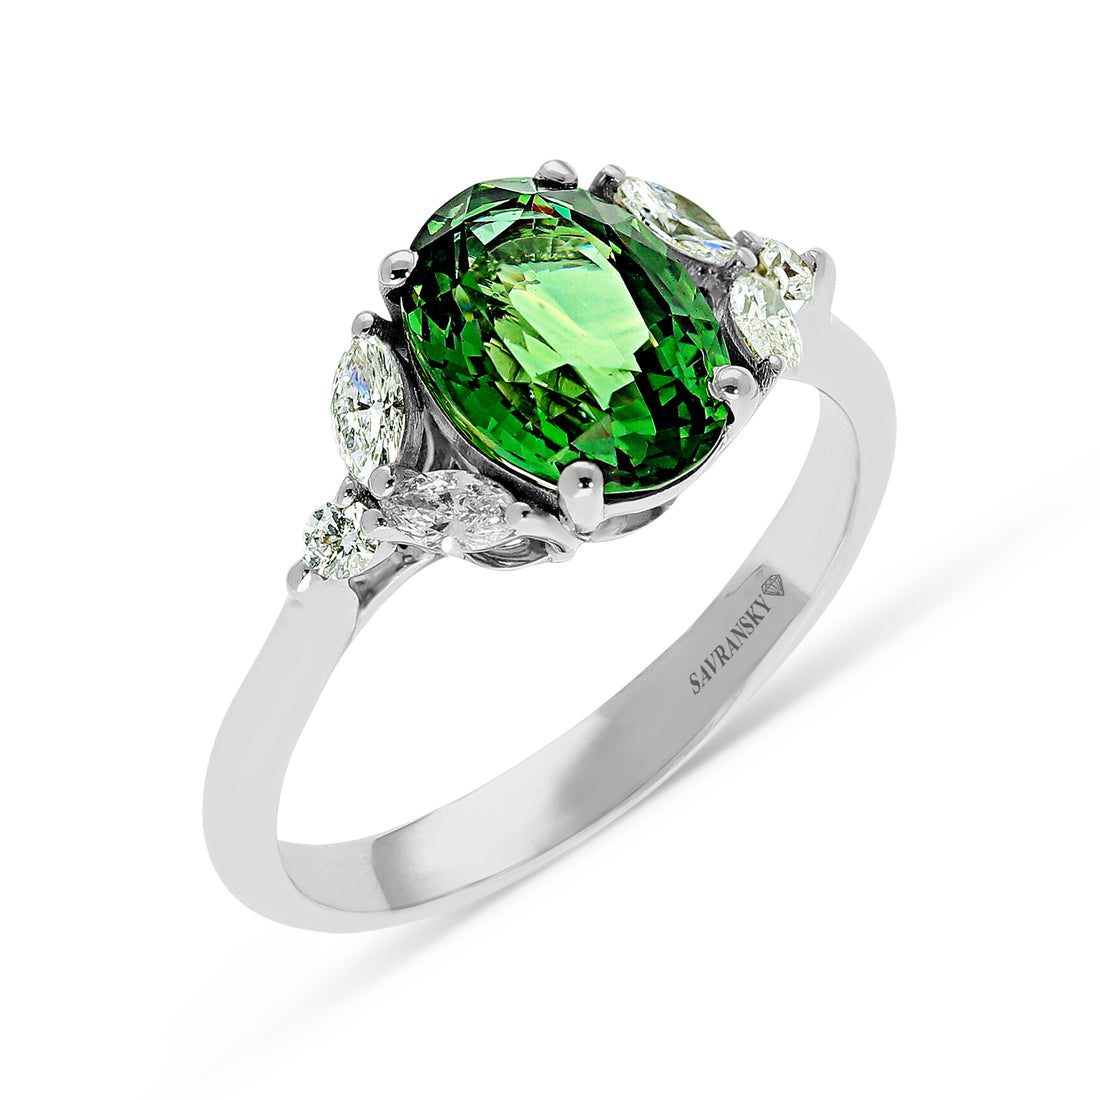 Oval Cut Natural Green Sapphire Birthstone Ring